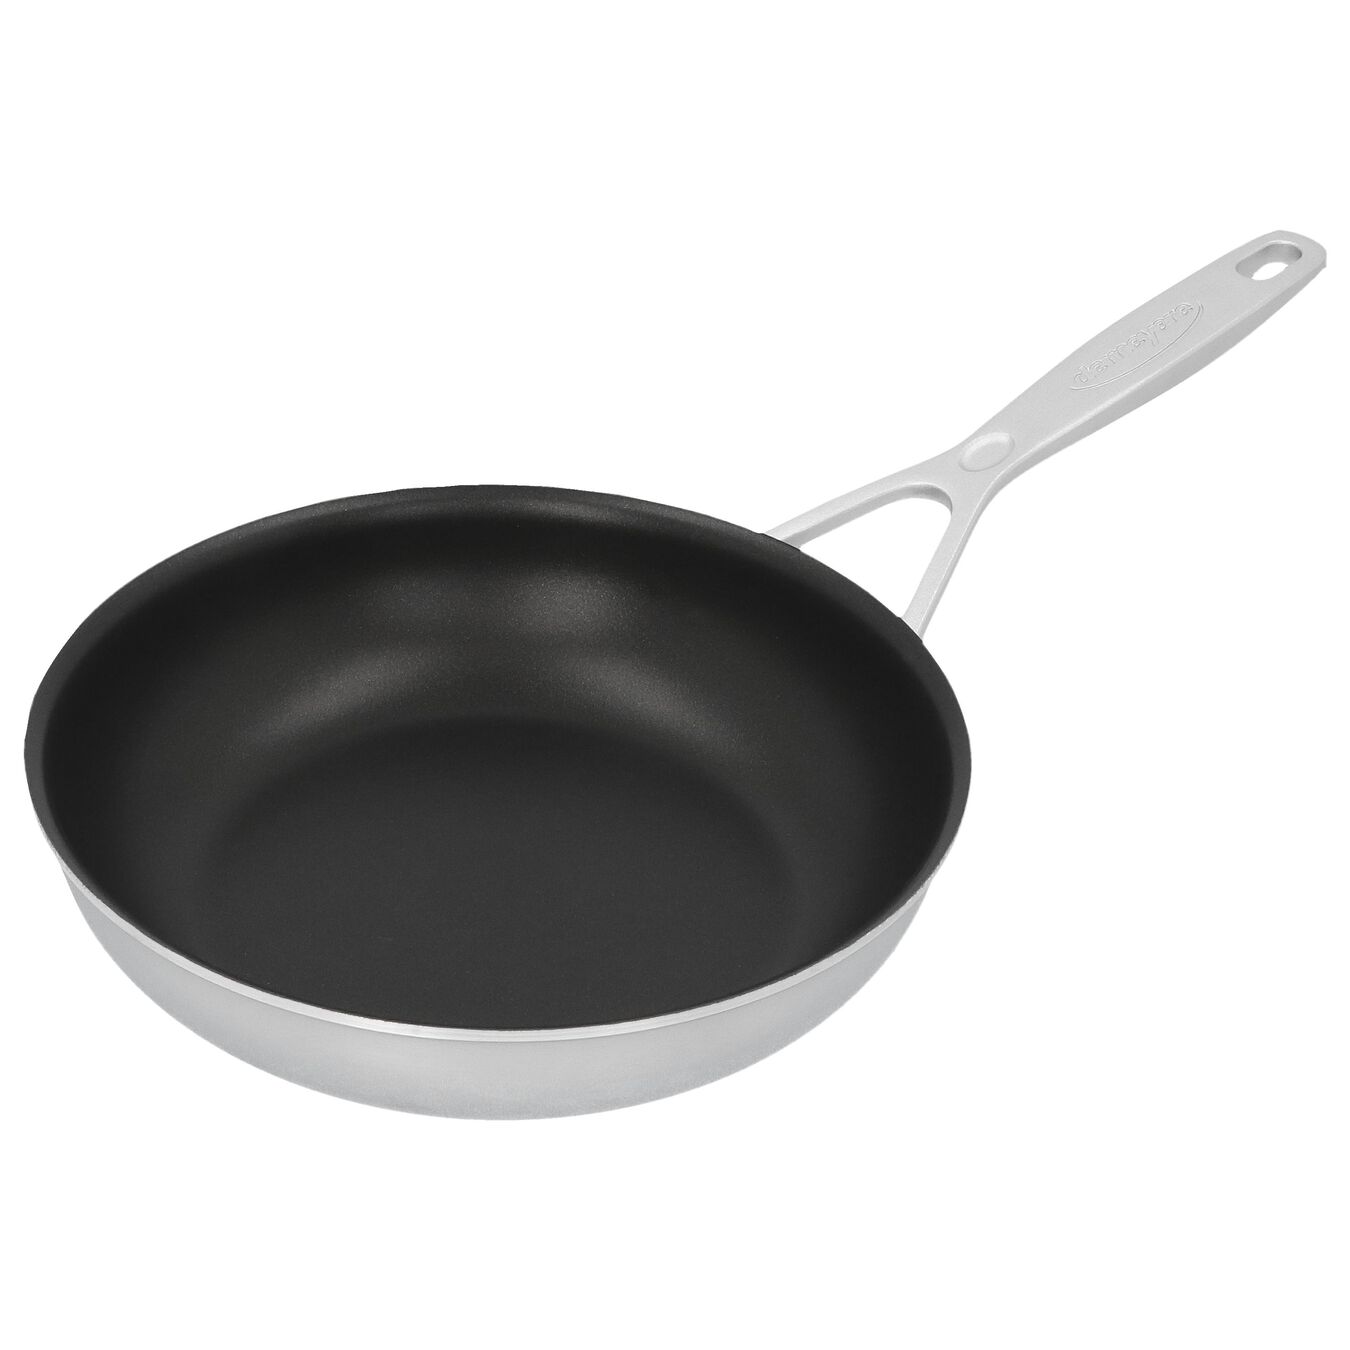 8-inch, 18/10 Stainless Steel, PTFE, Traditional Nonstick Fry Pan,,large 4